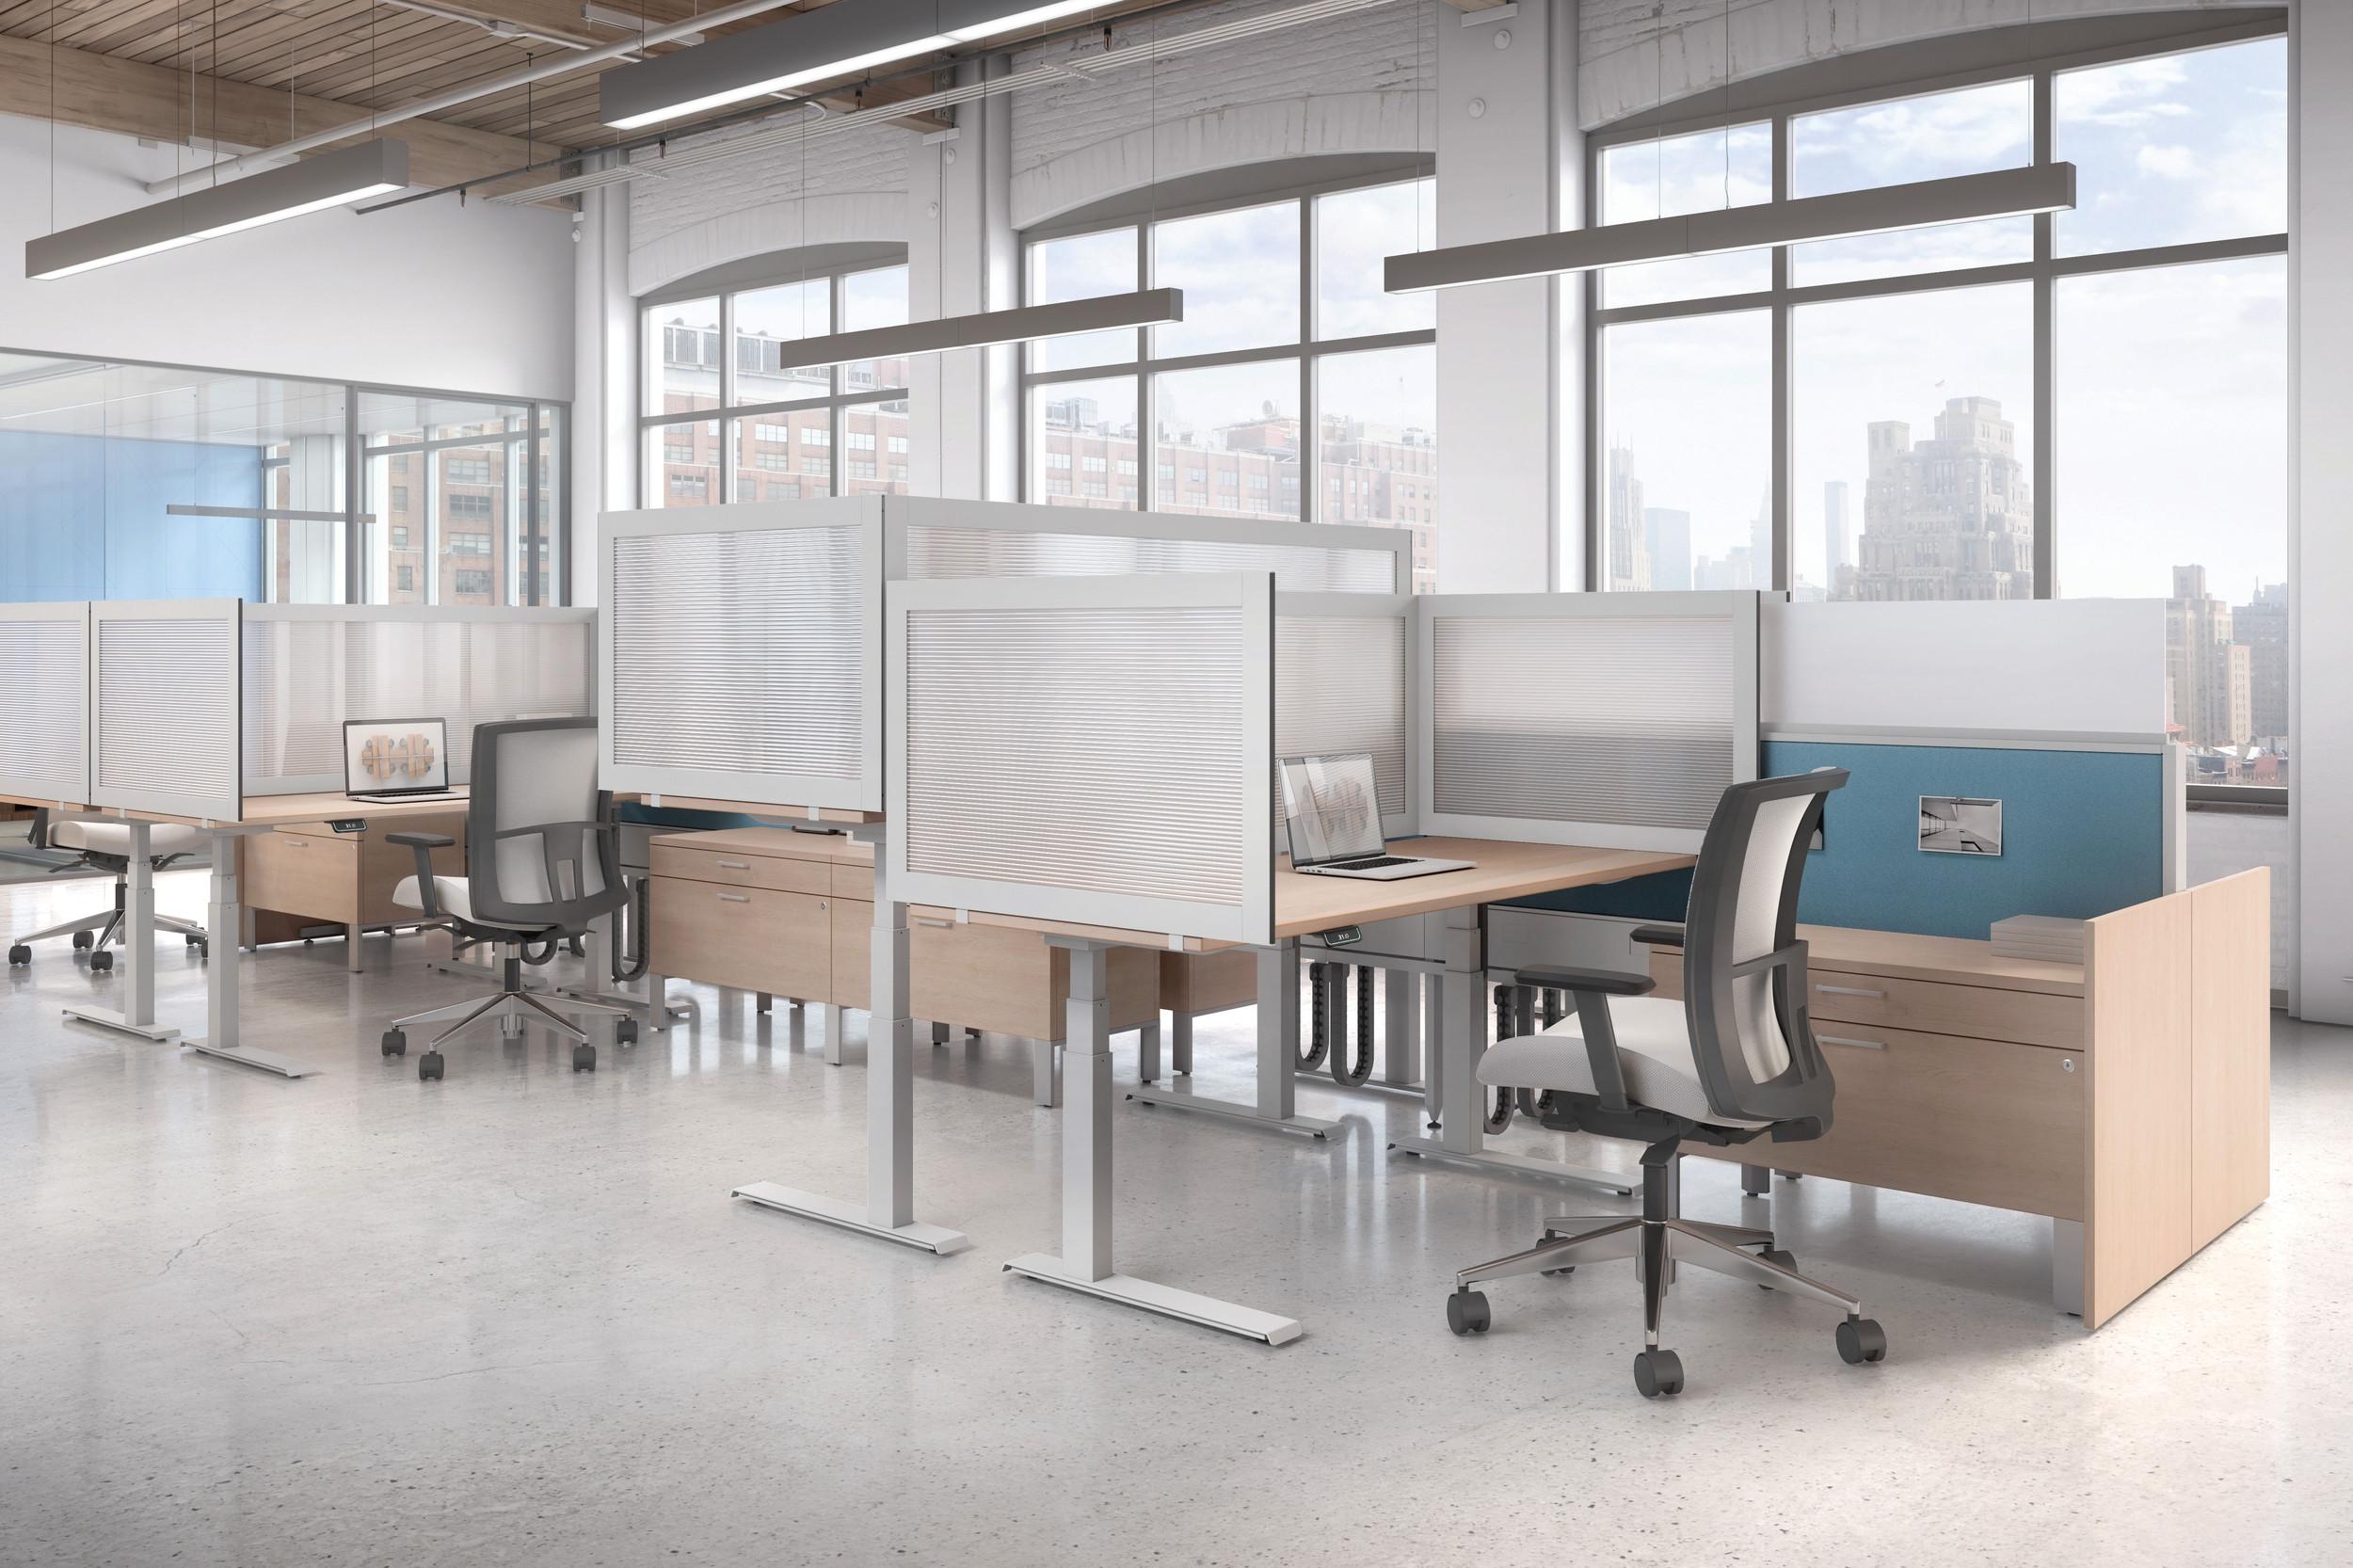 Product Products | Modular Office Environments image